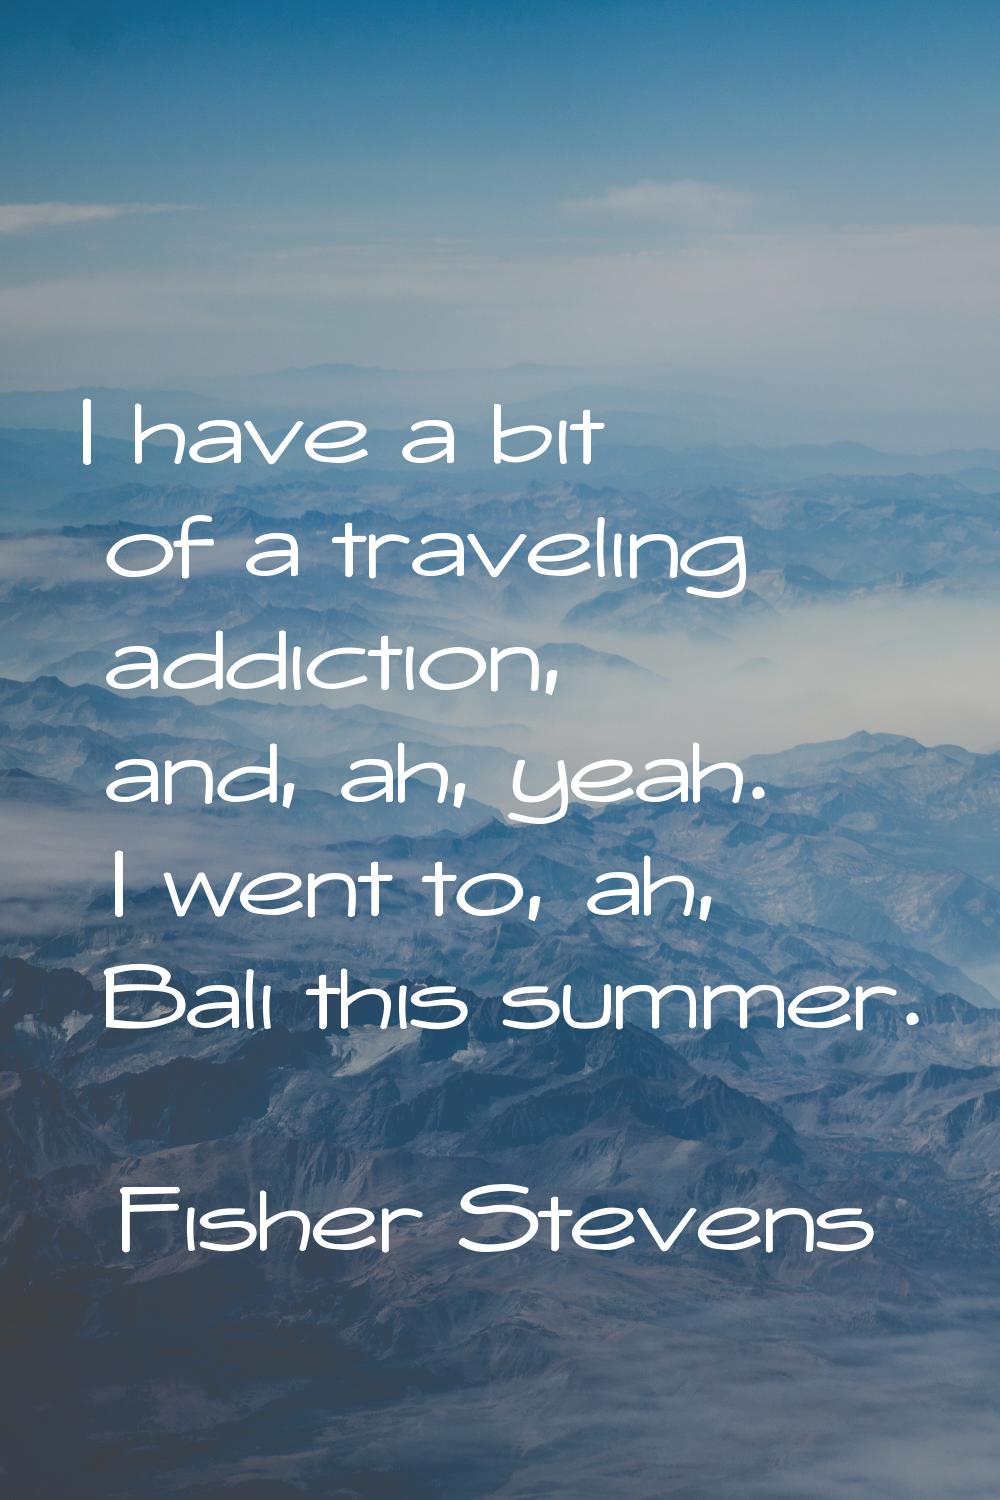 I have a bit of a traveling addiction, and, ah, yeah. I went to, ah, Bali this summer.